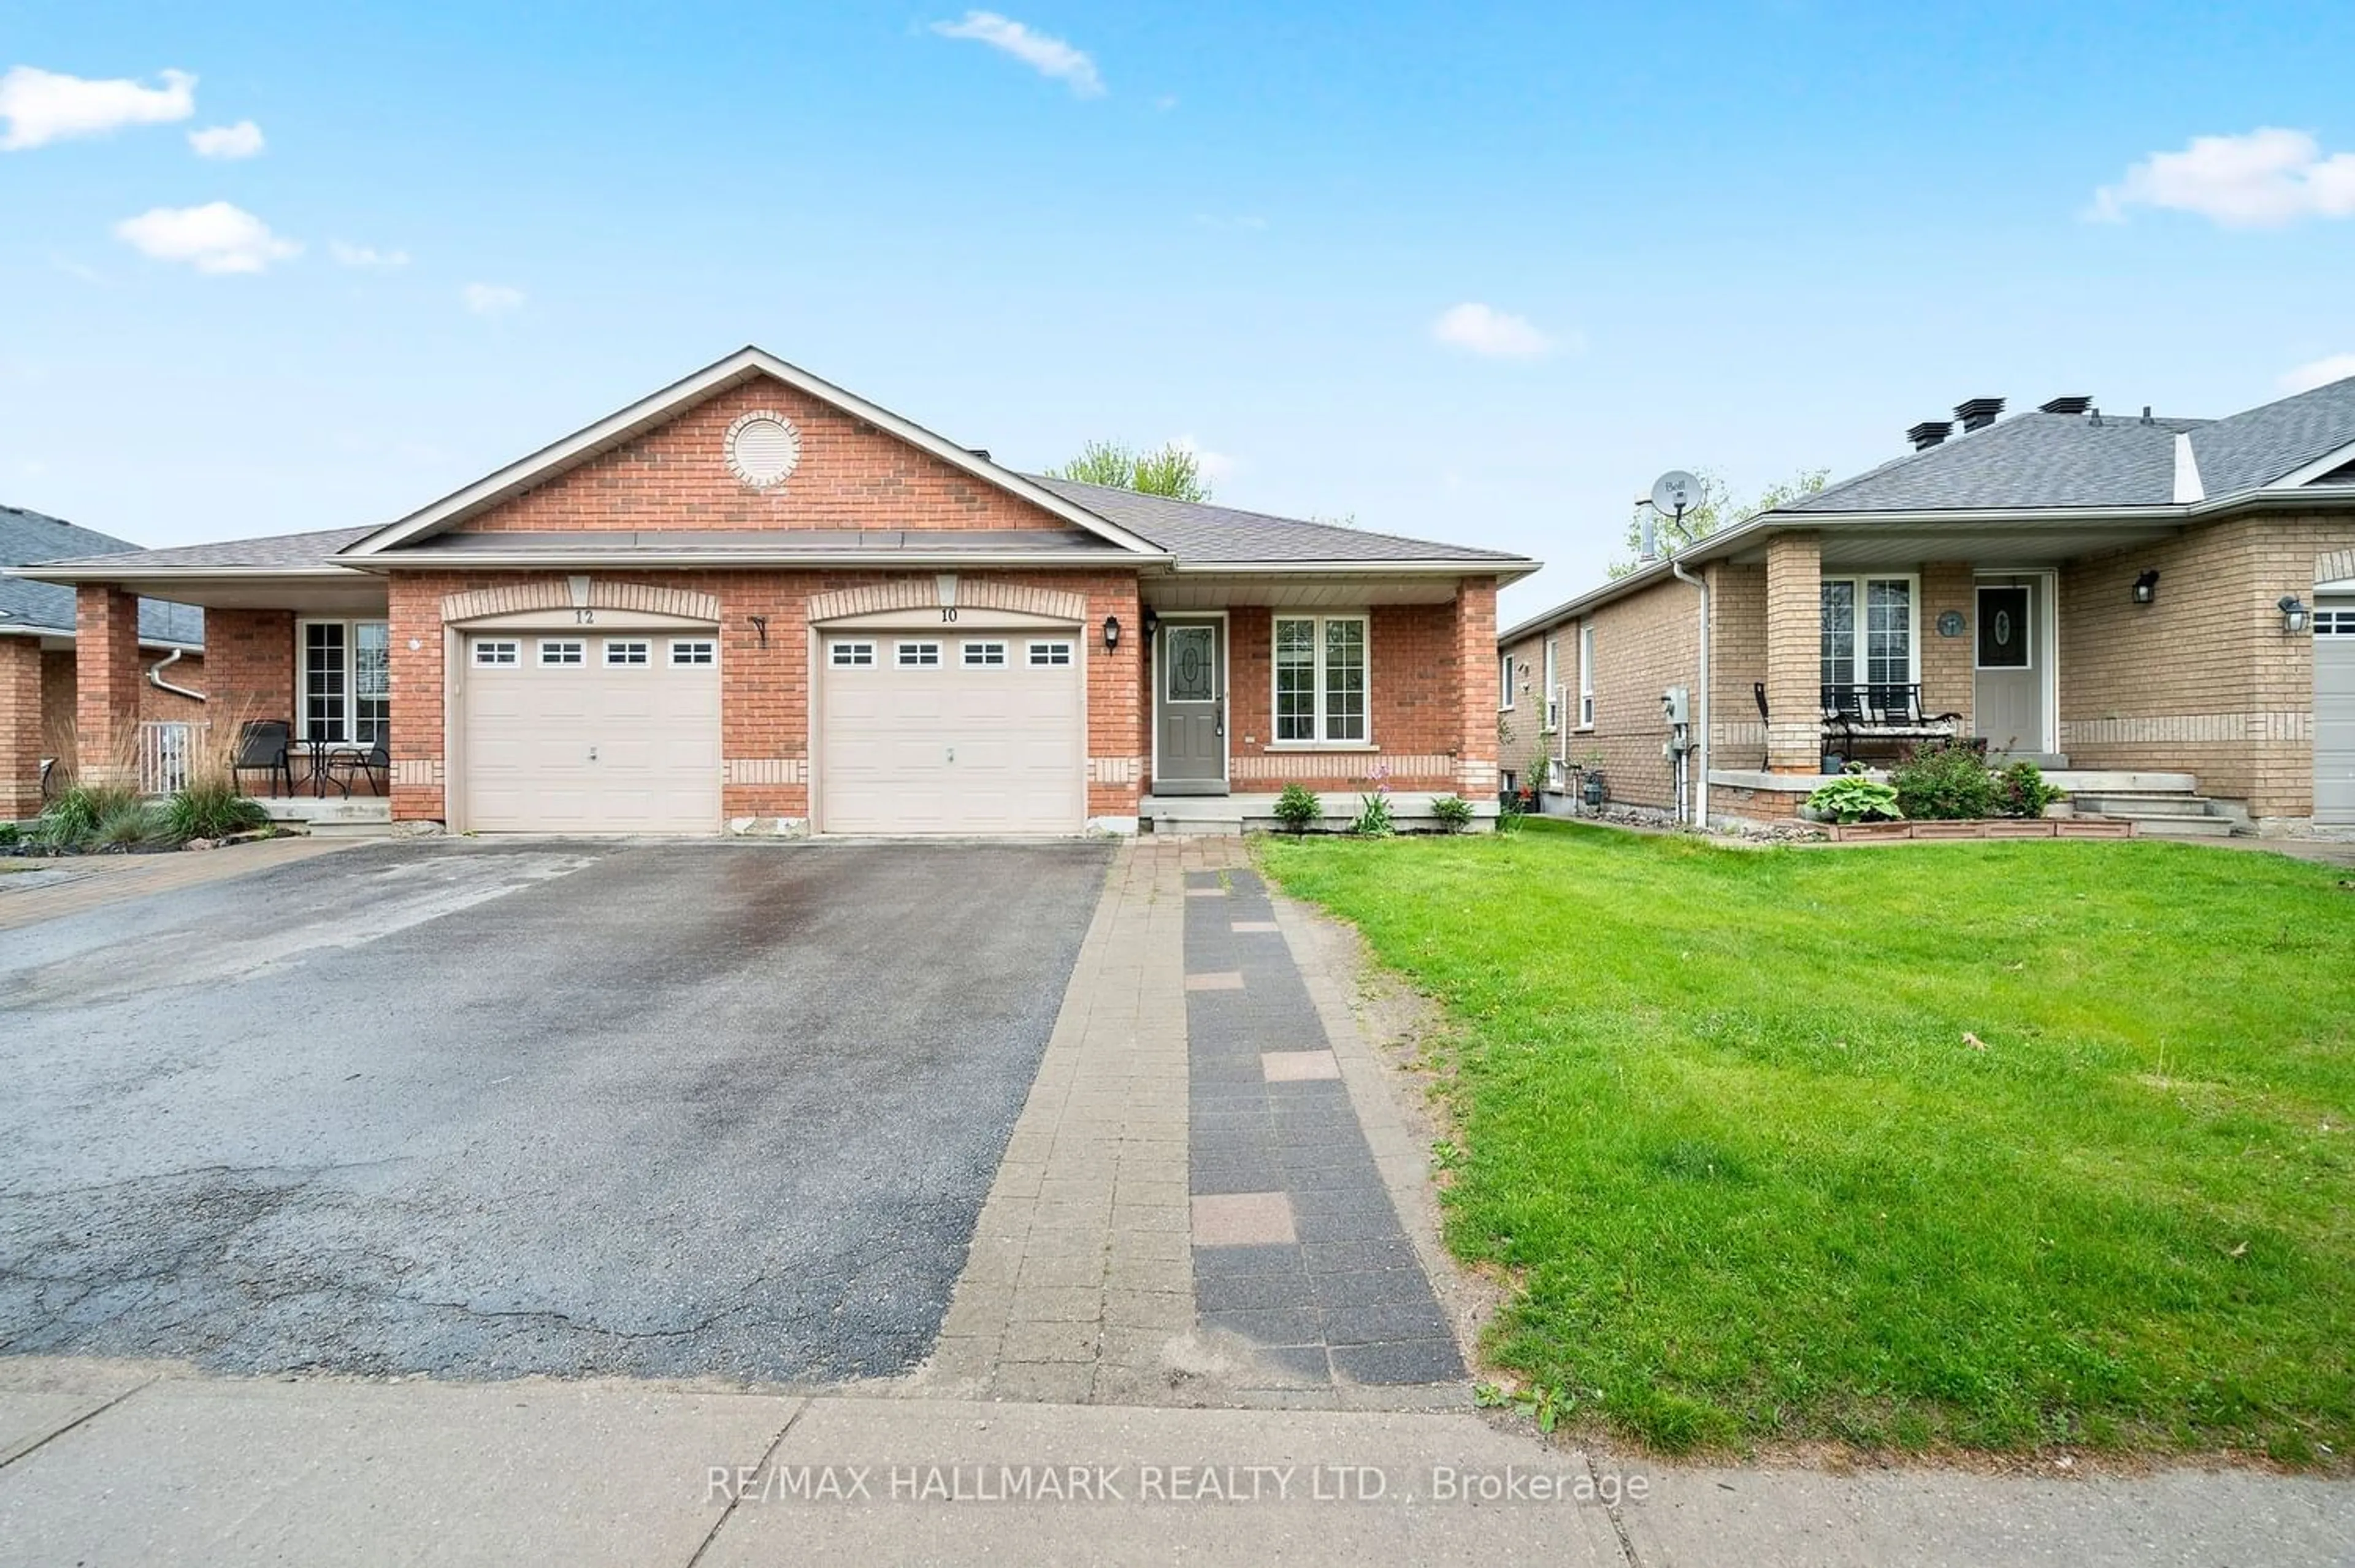 Home with brick exterior material for 10 Trask Dr, Barrie Ontario L4N 5R4